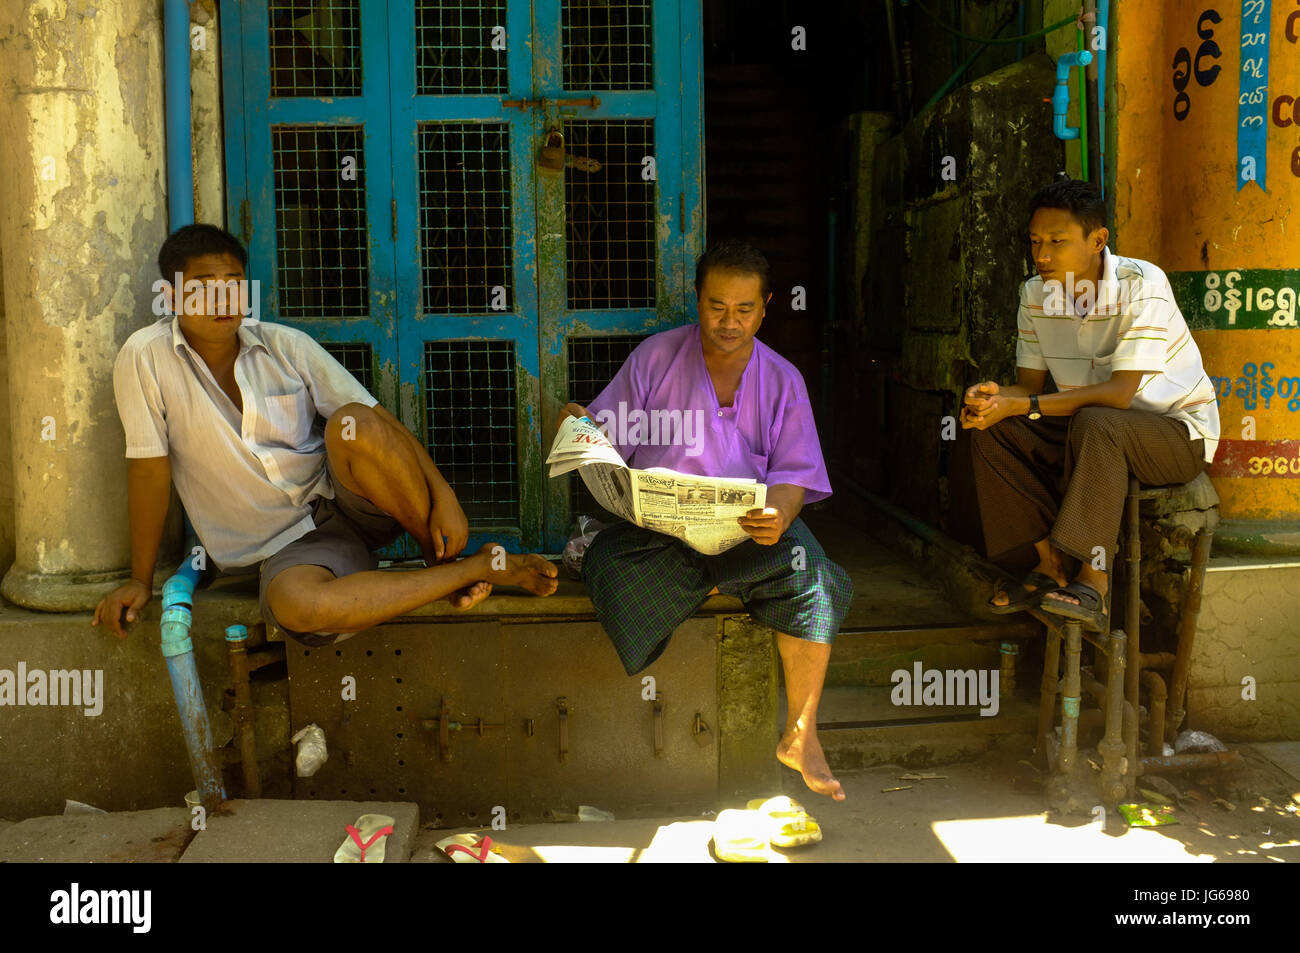 Three residents share a newspaper in downtown Yangon, Myanmar Stock Photo